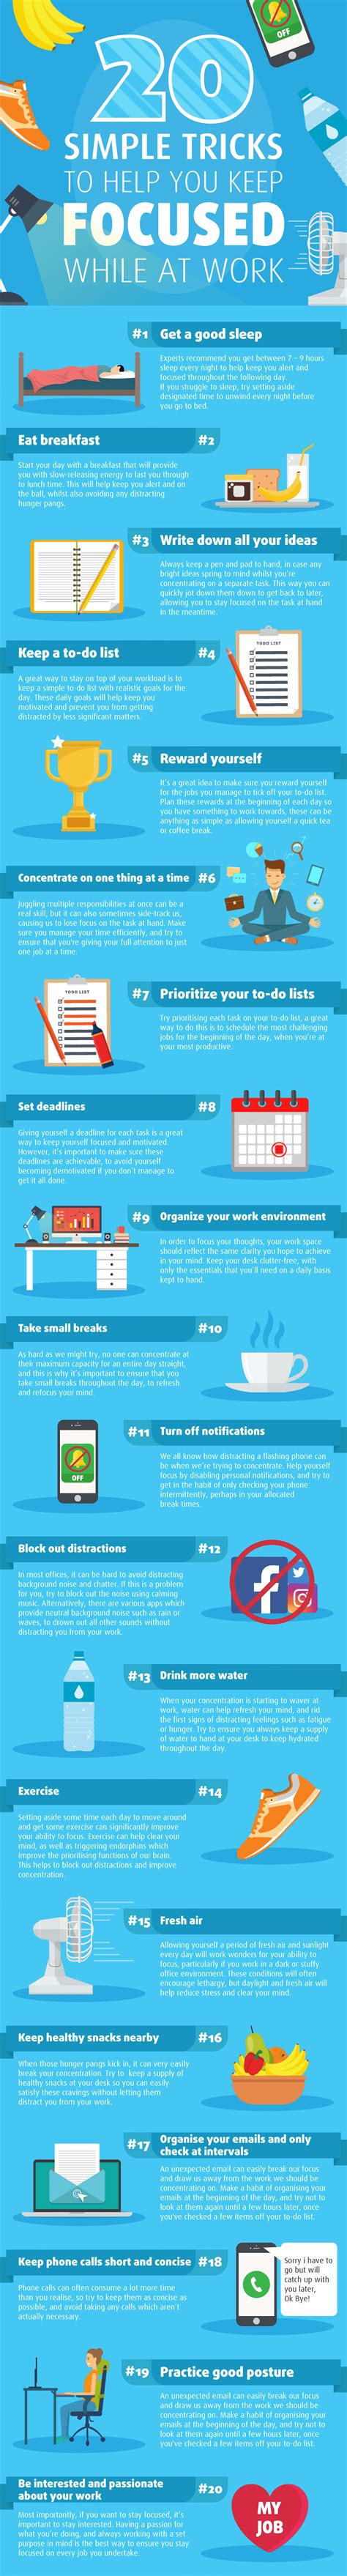 20 Tips To Stay More Focused At Work Psa International